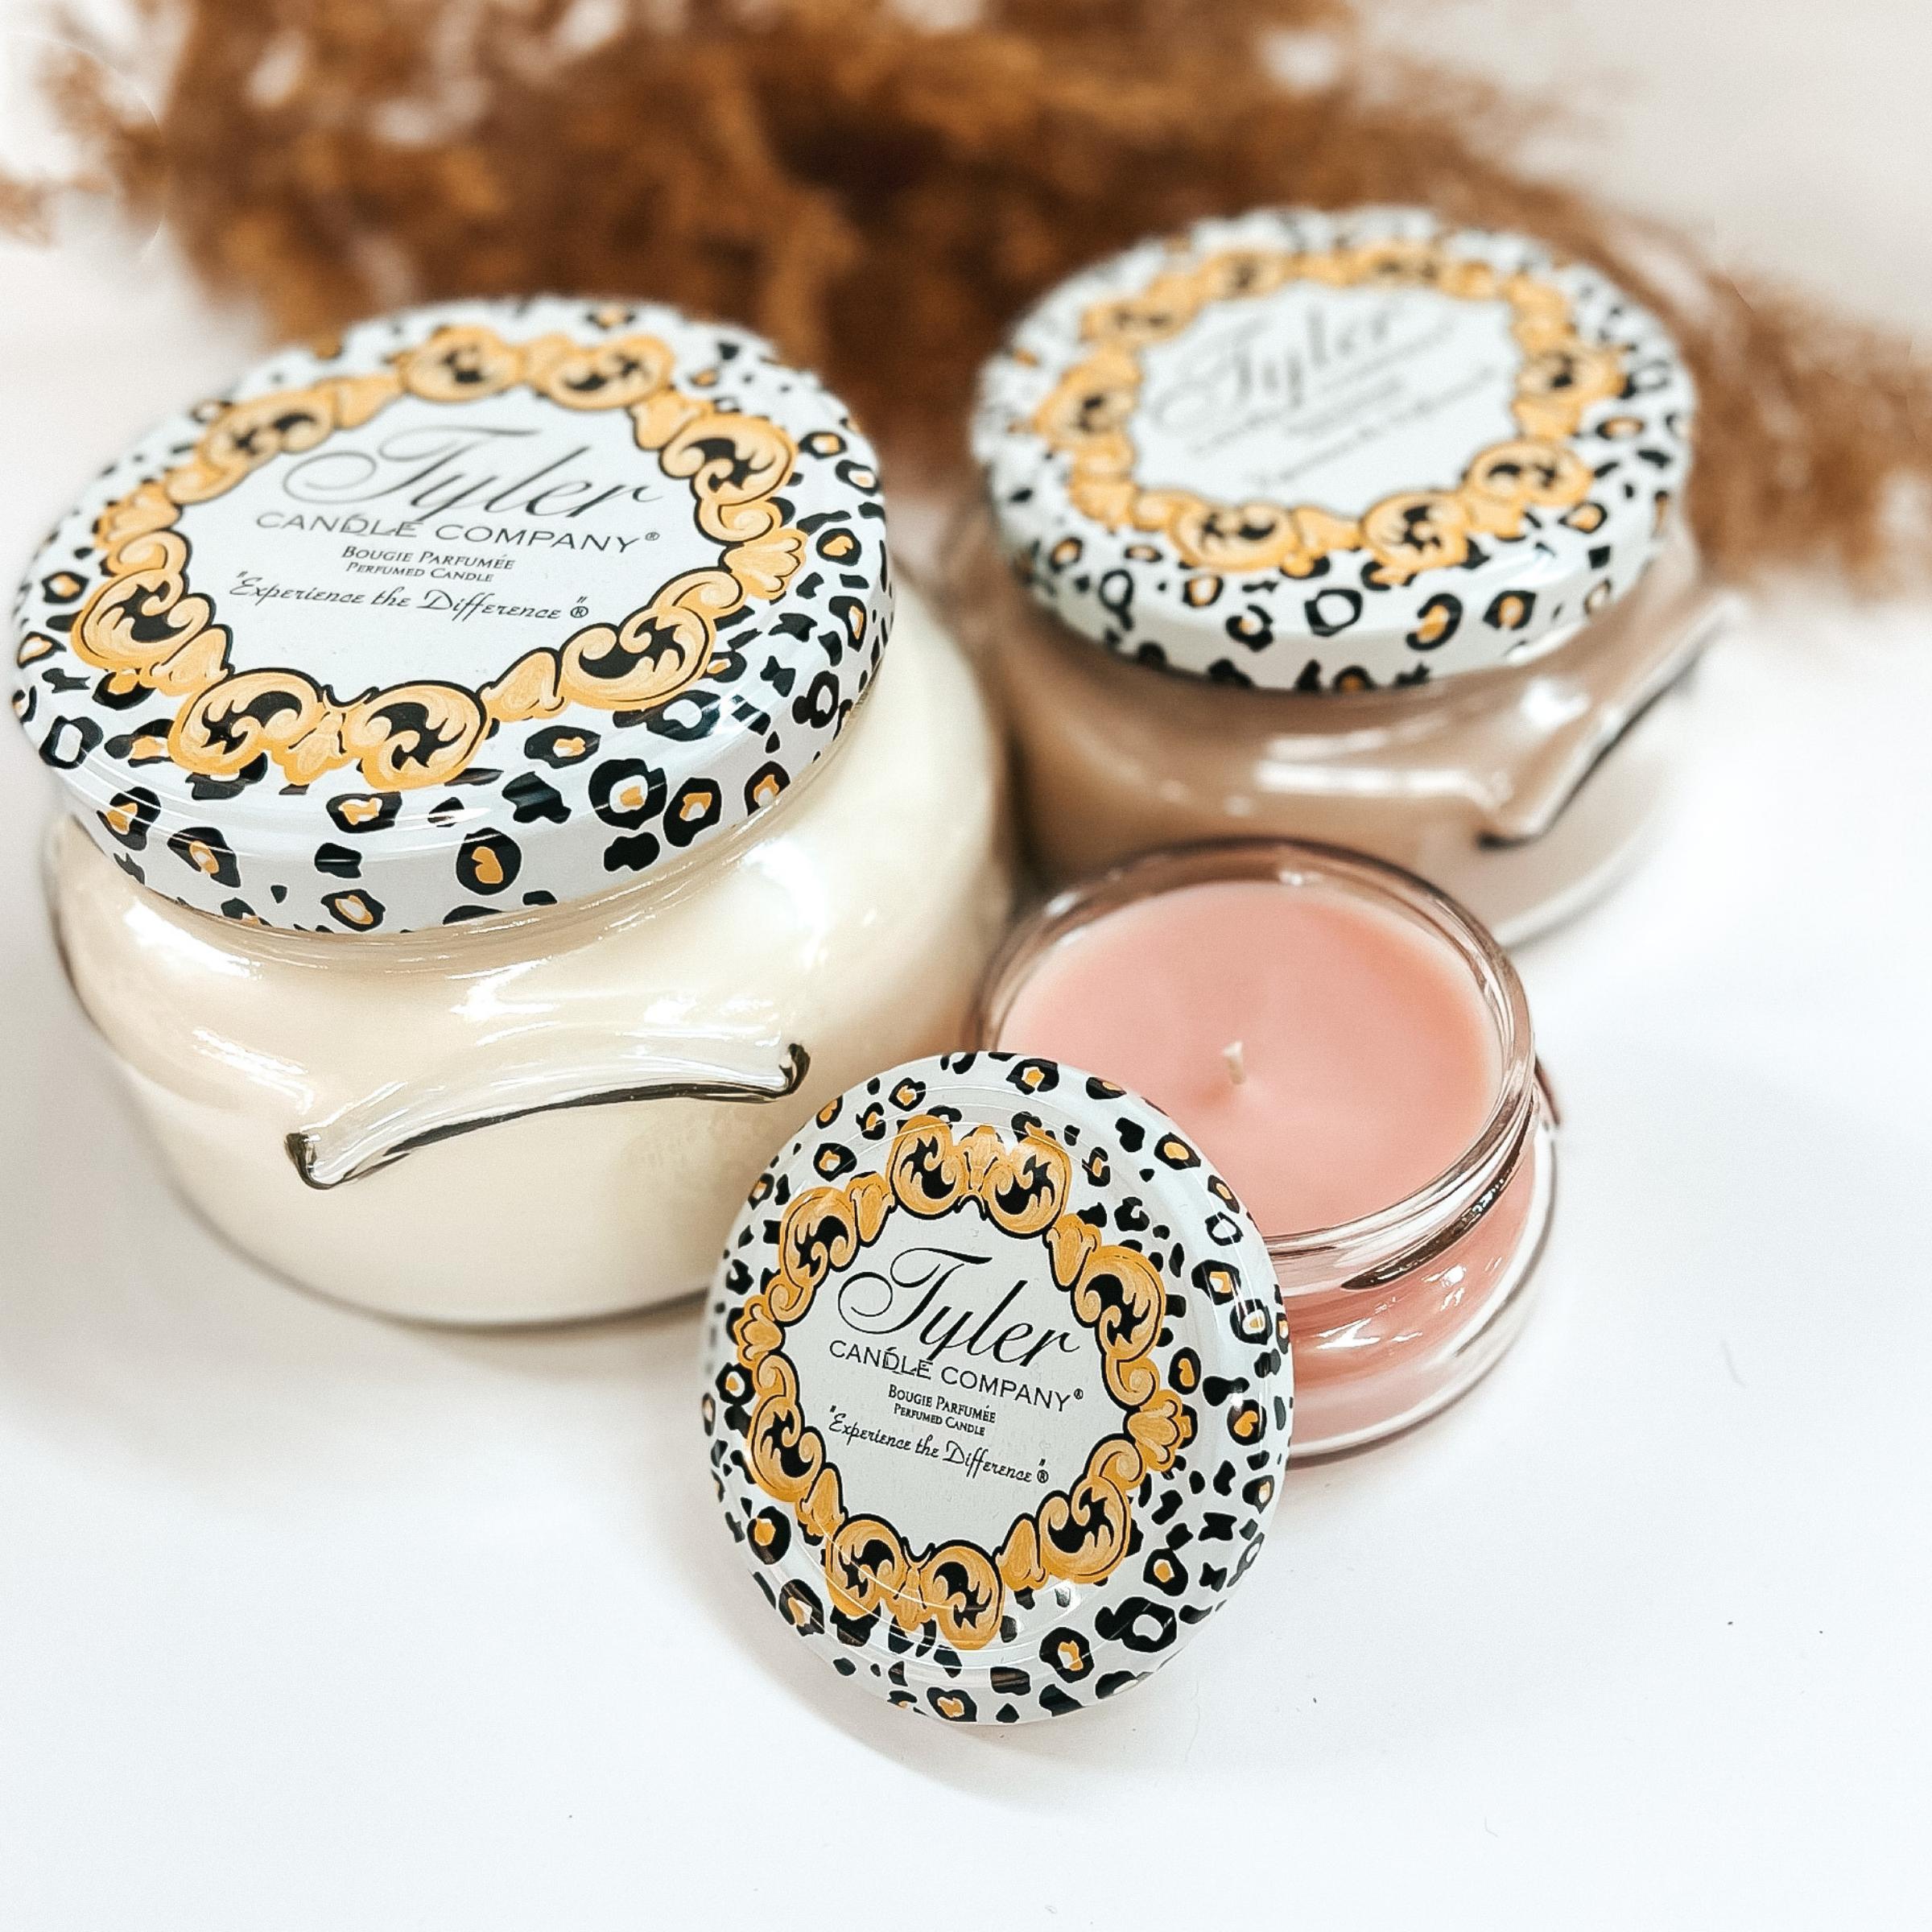 Tyler Candle Company | 3.4 oz. 1 Wick Jar Candle | Best Selling Scents - Giddy Up Glamour Boutique